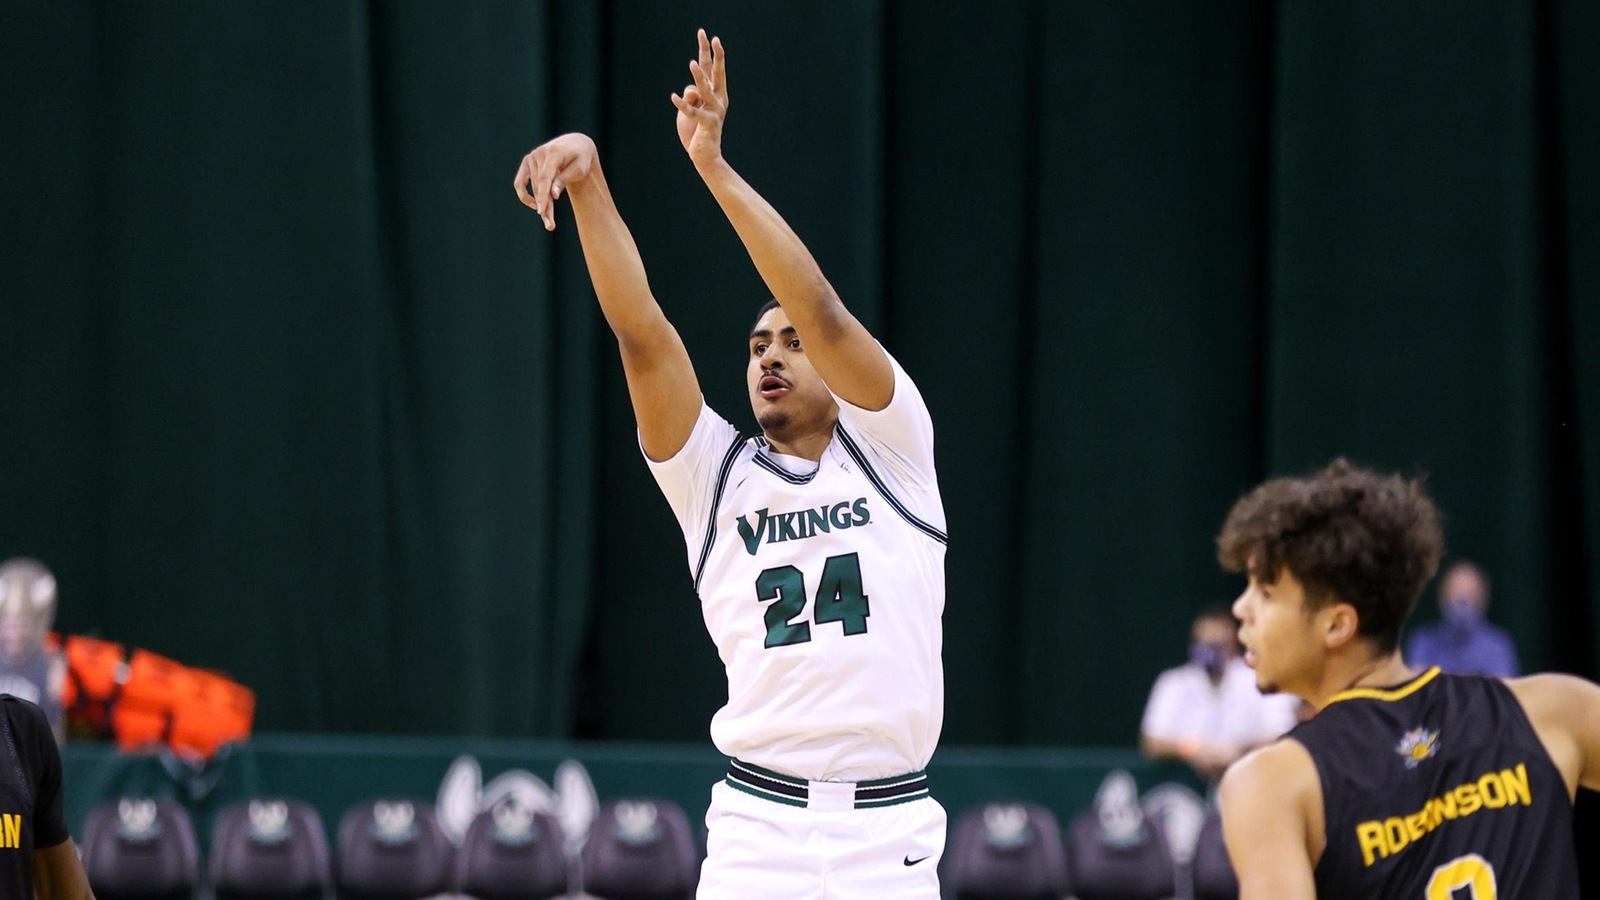 Vikings Notch 13th #HLMBB Win Friday Against the Golden Grizzlies